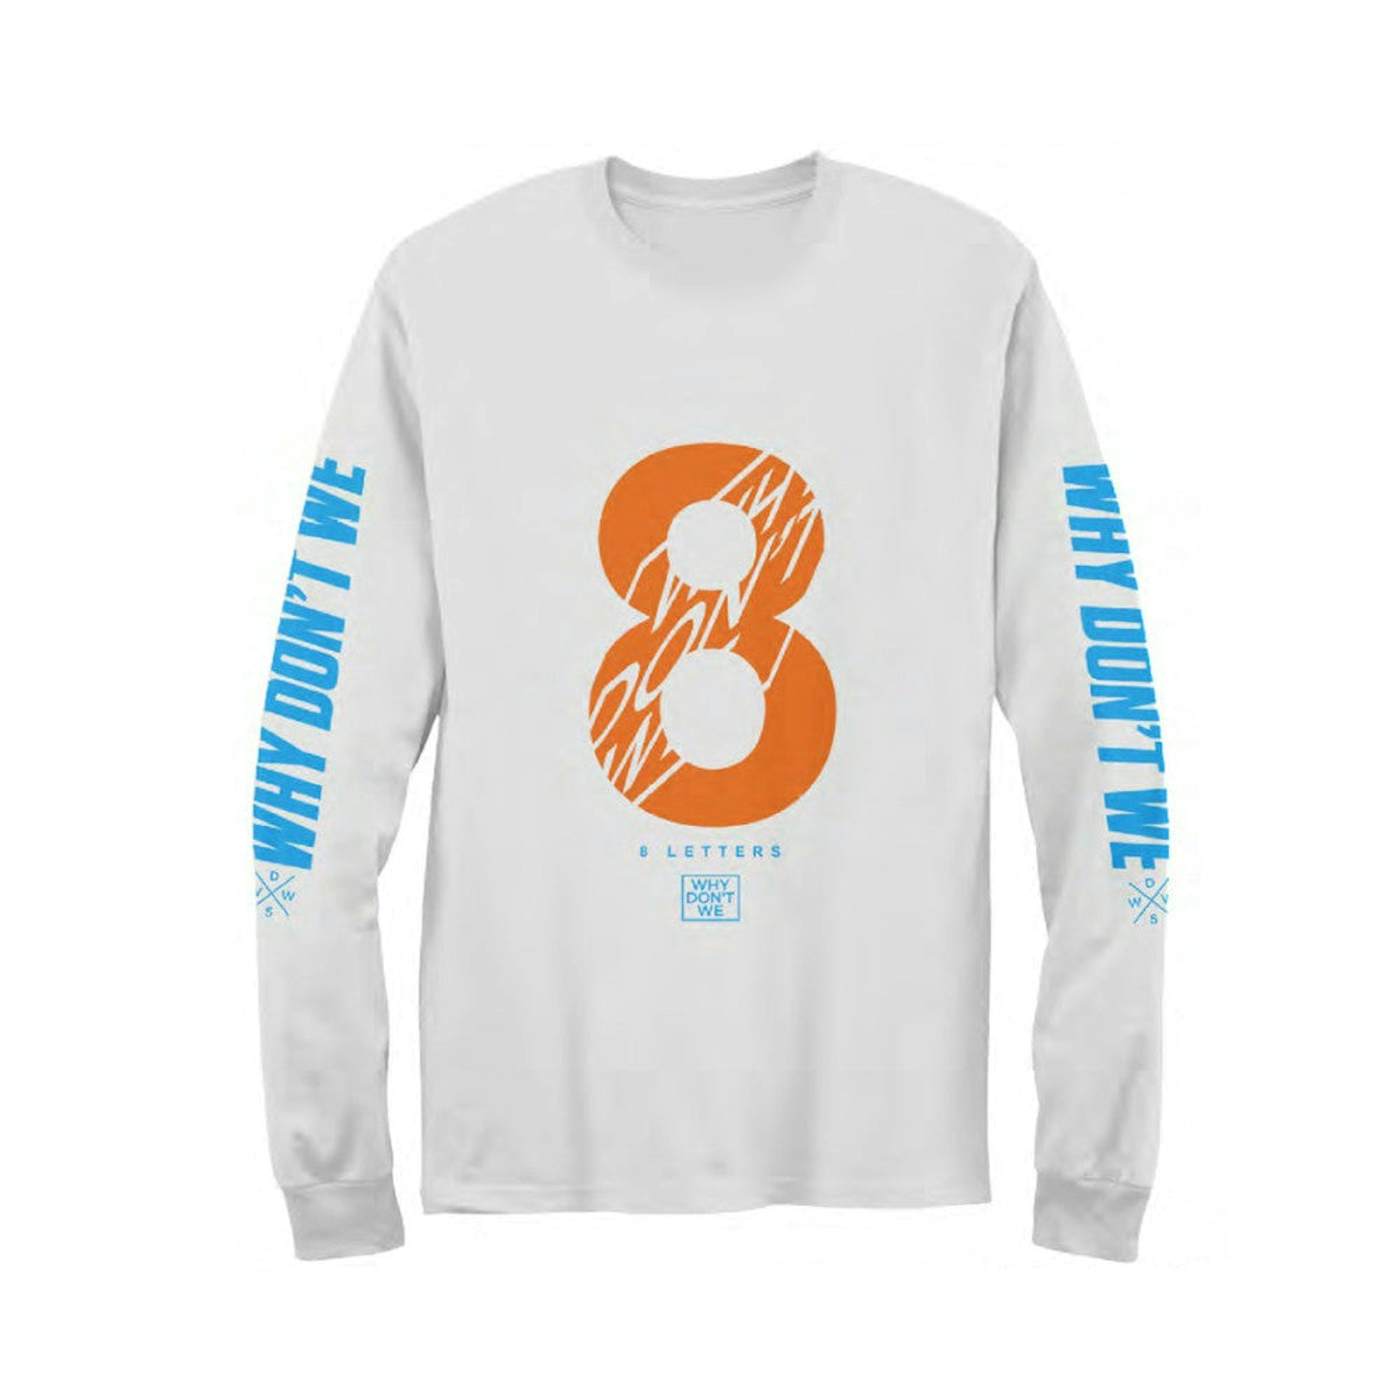 Why Don't We Big 8 Long Sleeve